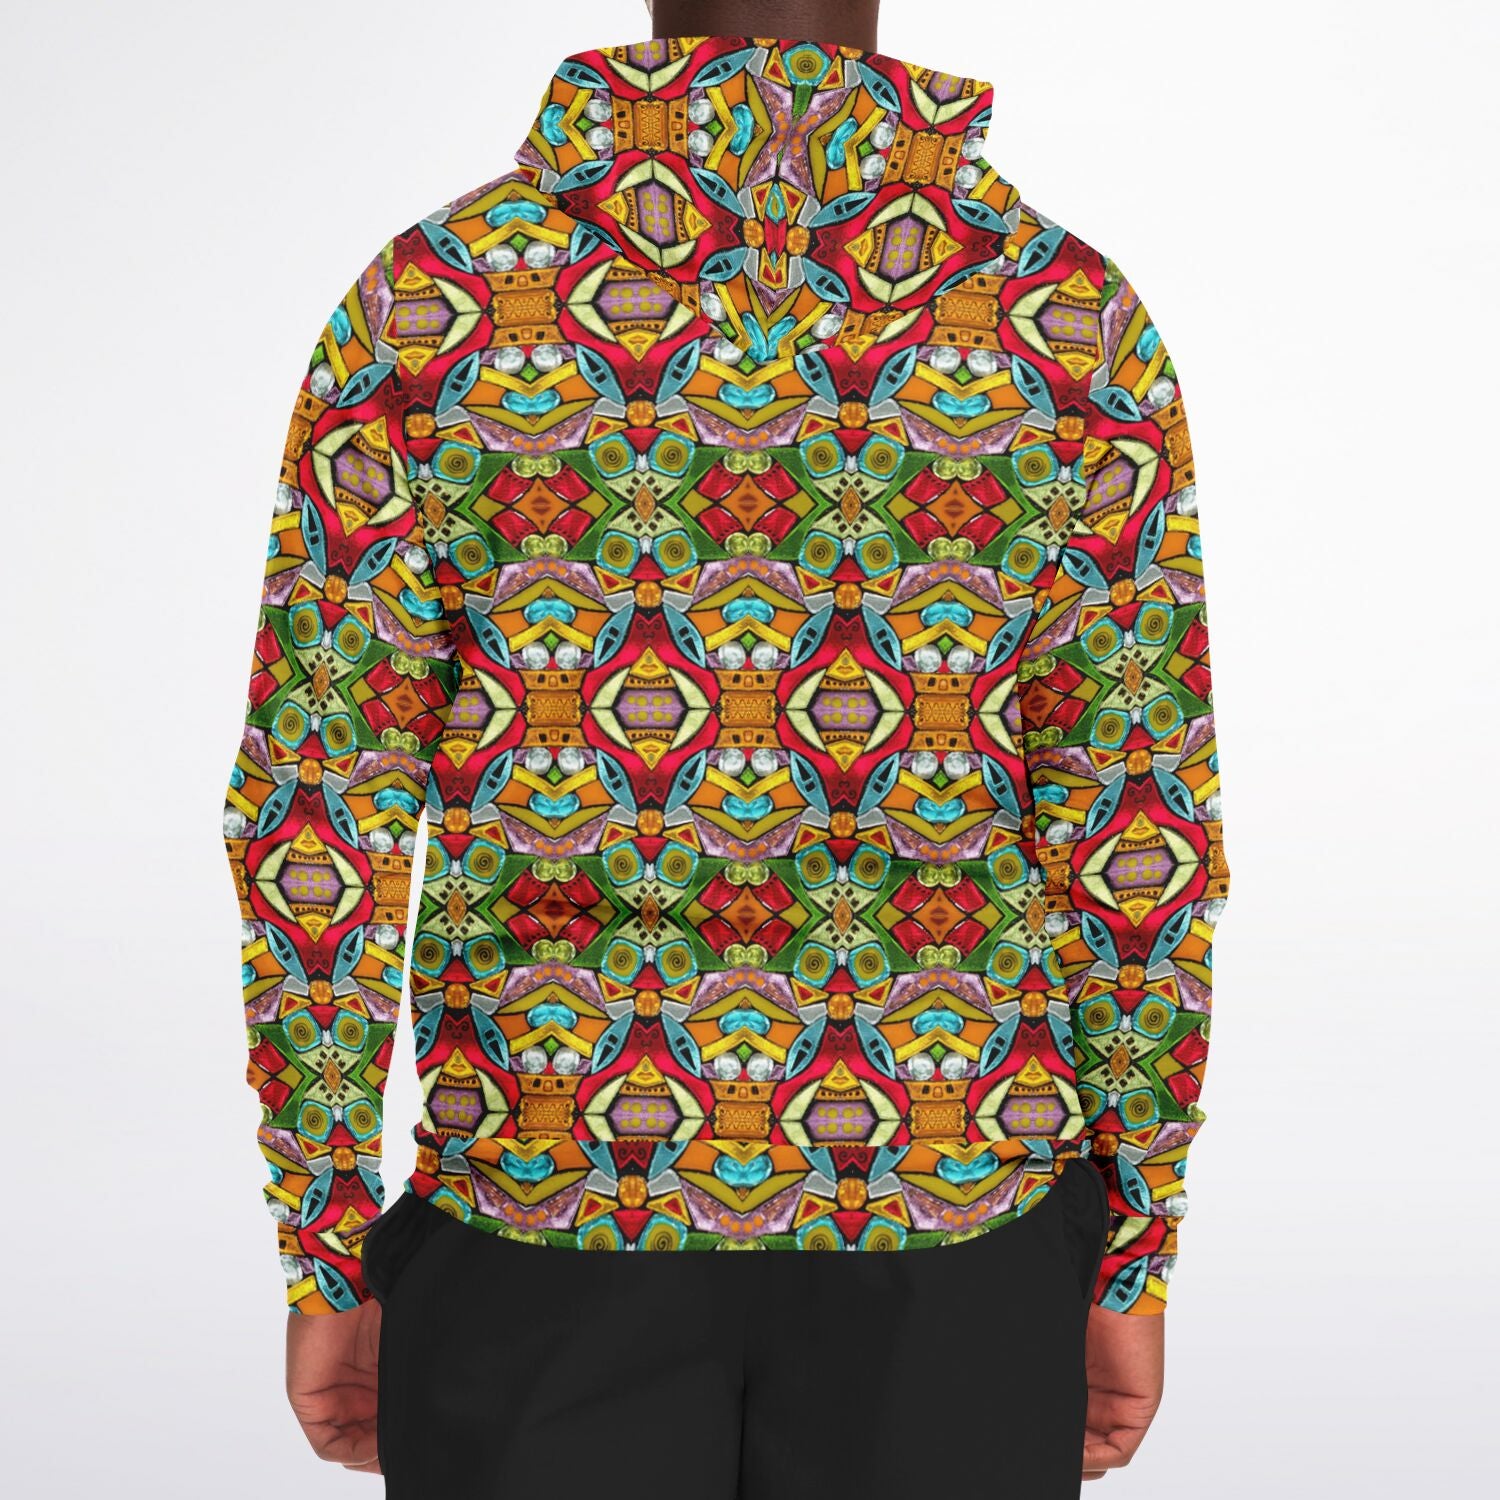 back of multicolored hoodie shown on a man